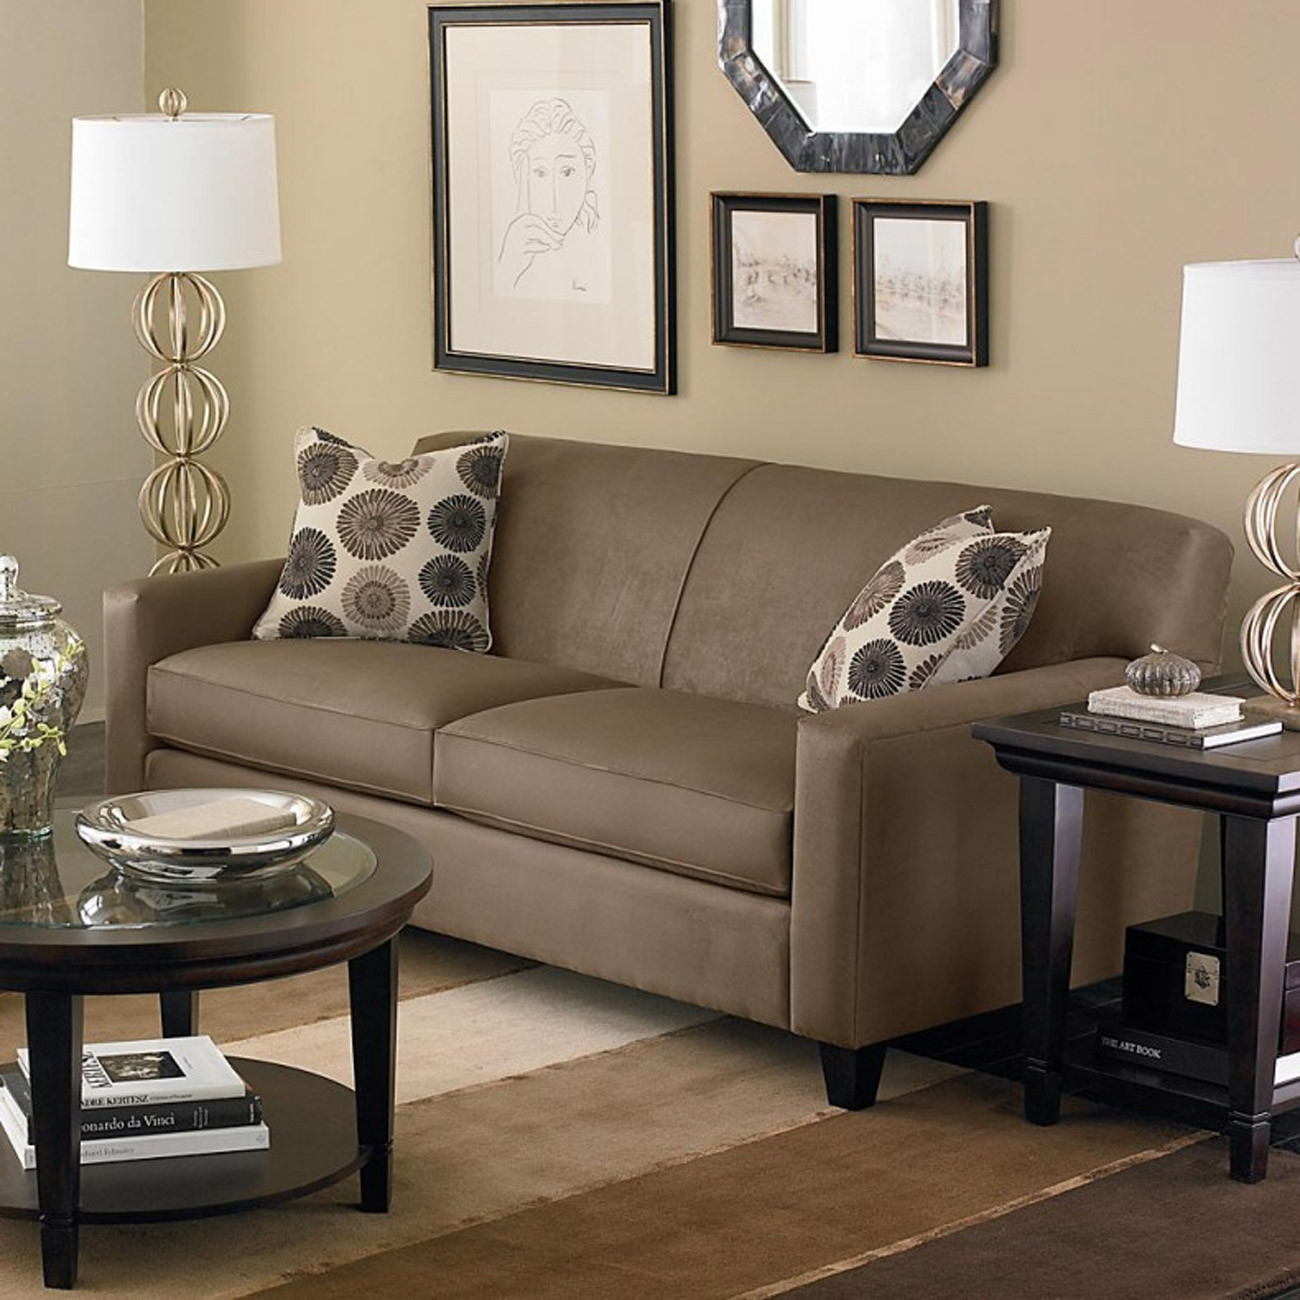 Small Living Room Sets
 Find Suitable Living Room Furniture With Your Style